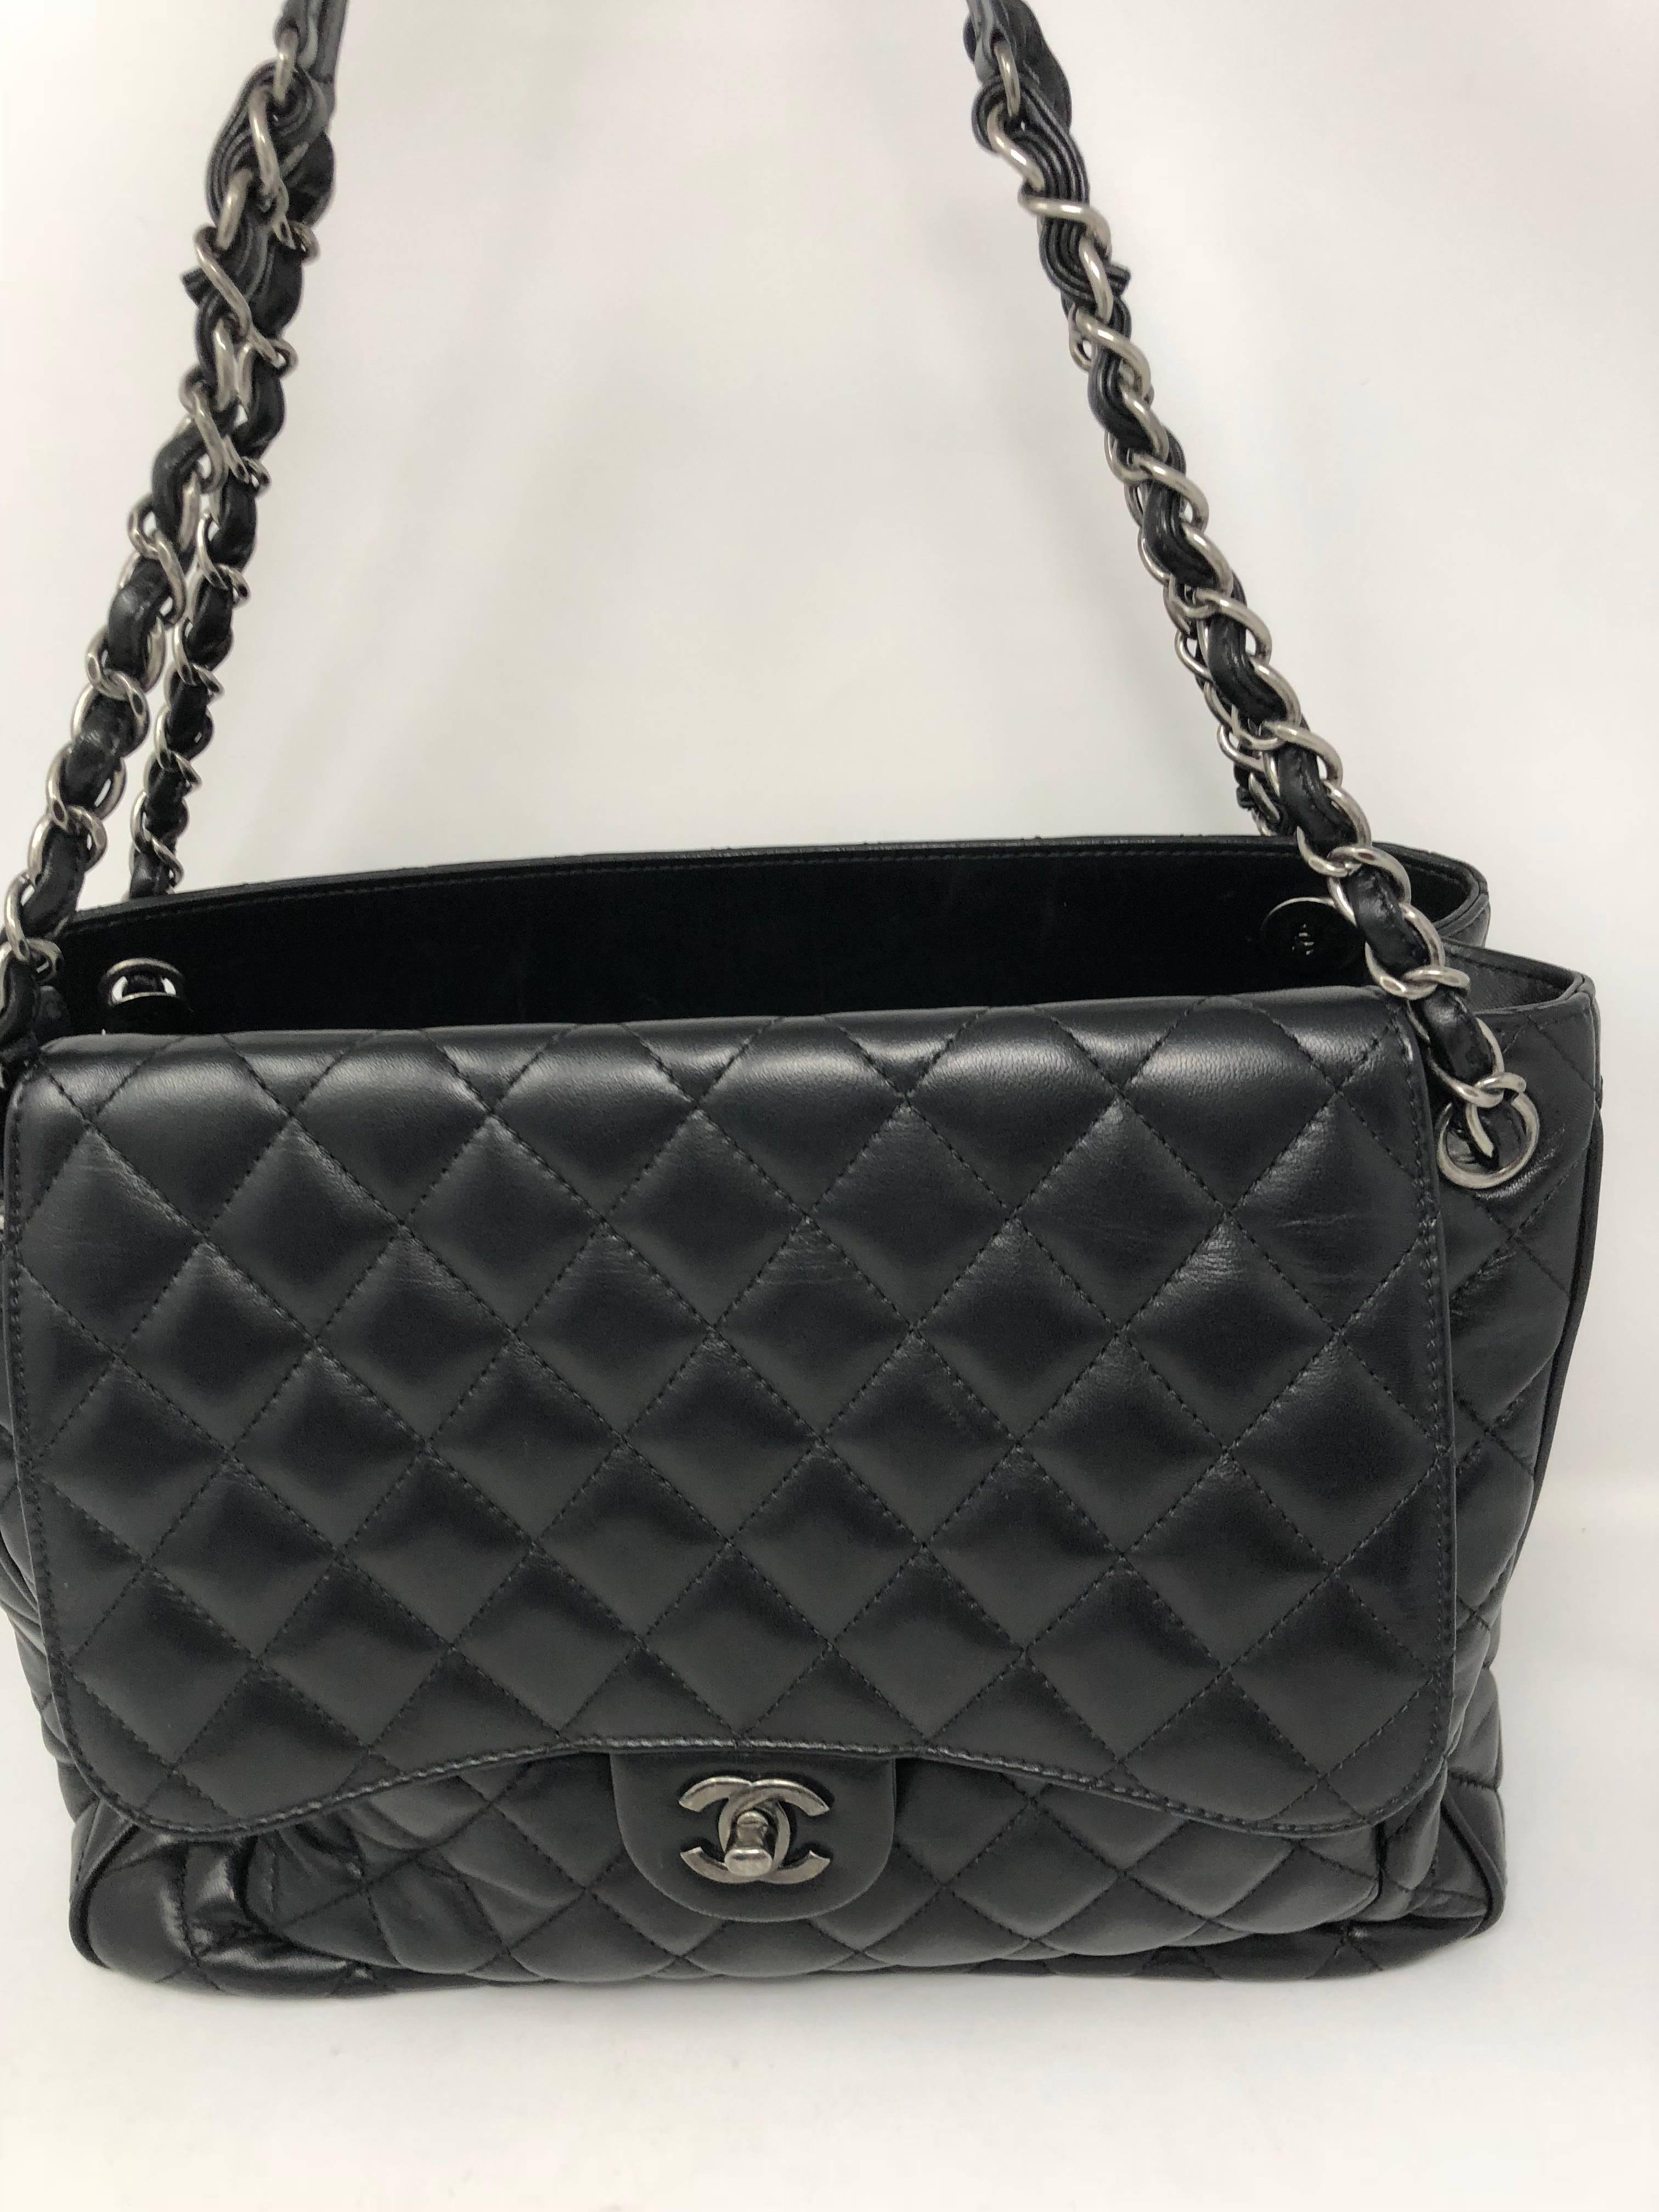 Black Chanel tote with antique silver hardware. Supple soft lambskin leather in mint condition. The hardware gives it a more modern look. 